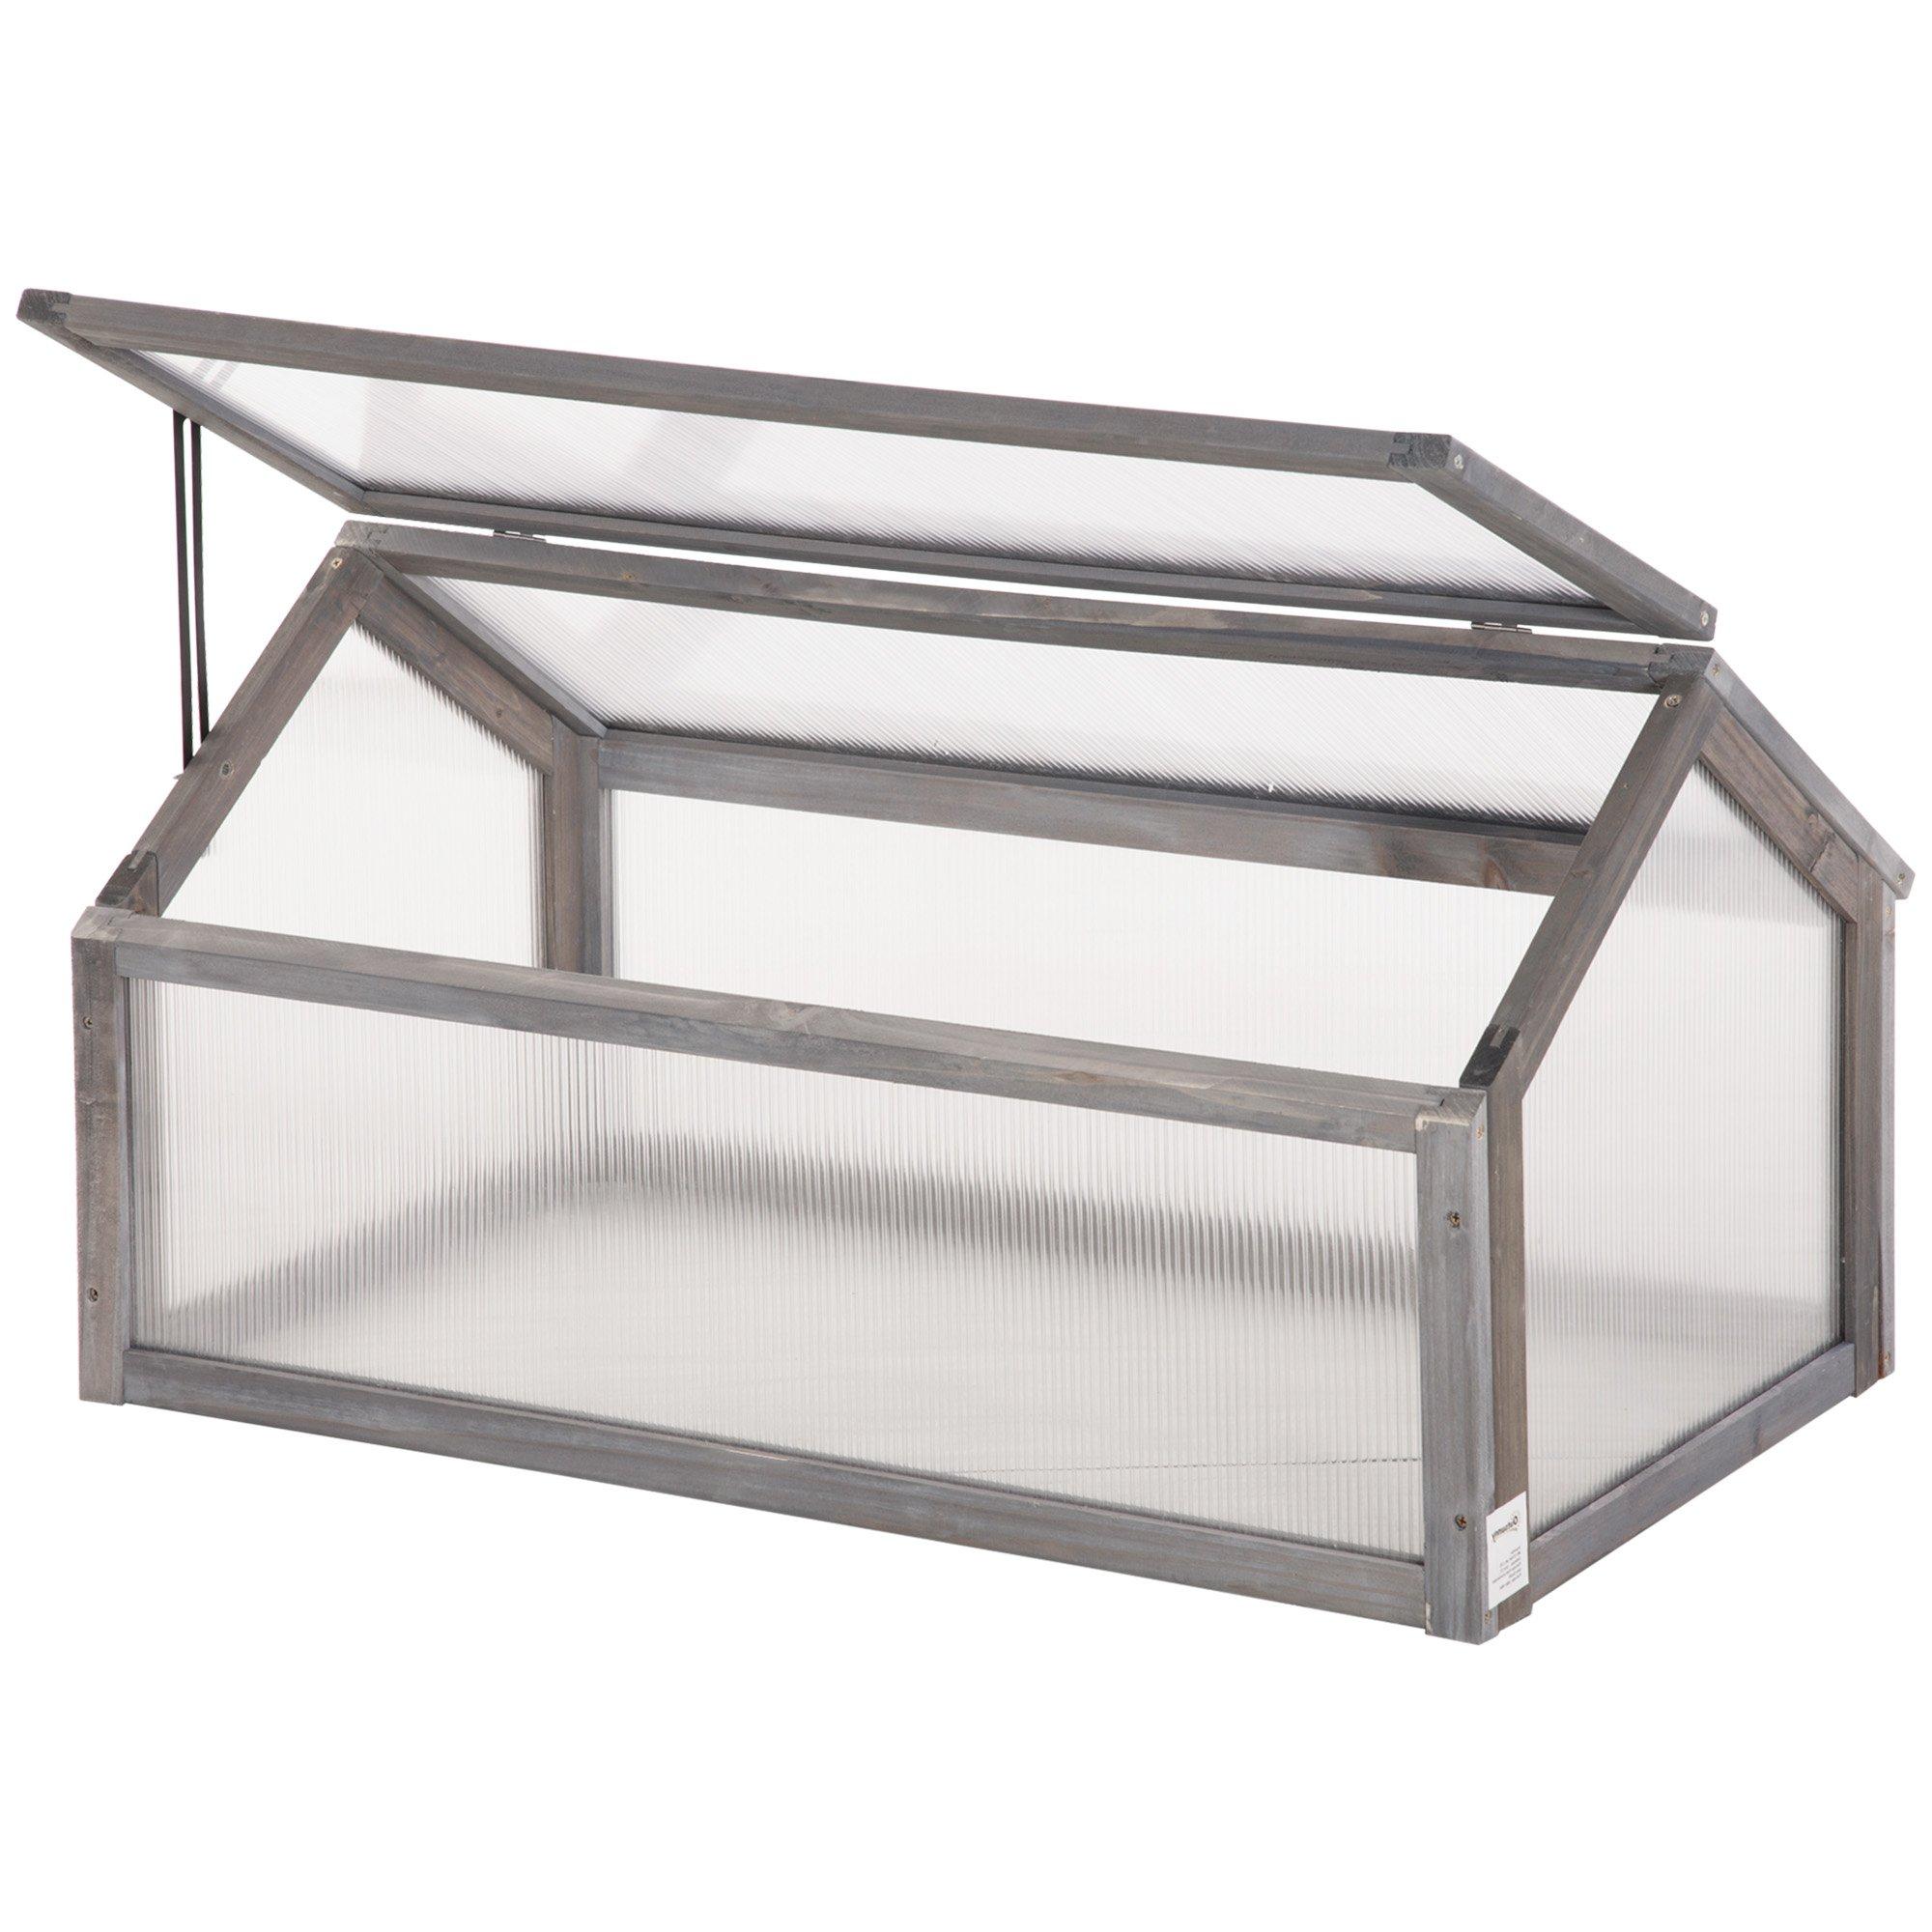 Wooden Cold Frame Greenhouse Garden Polycarbonate Grow House